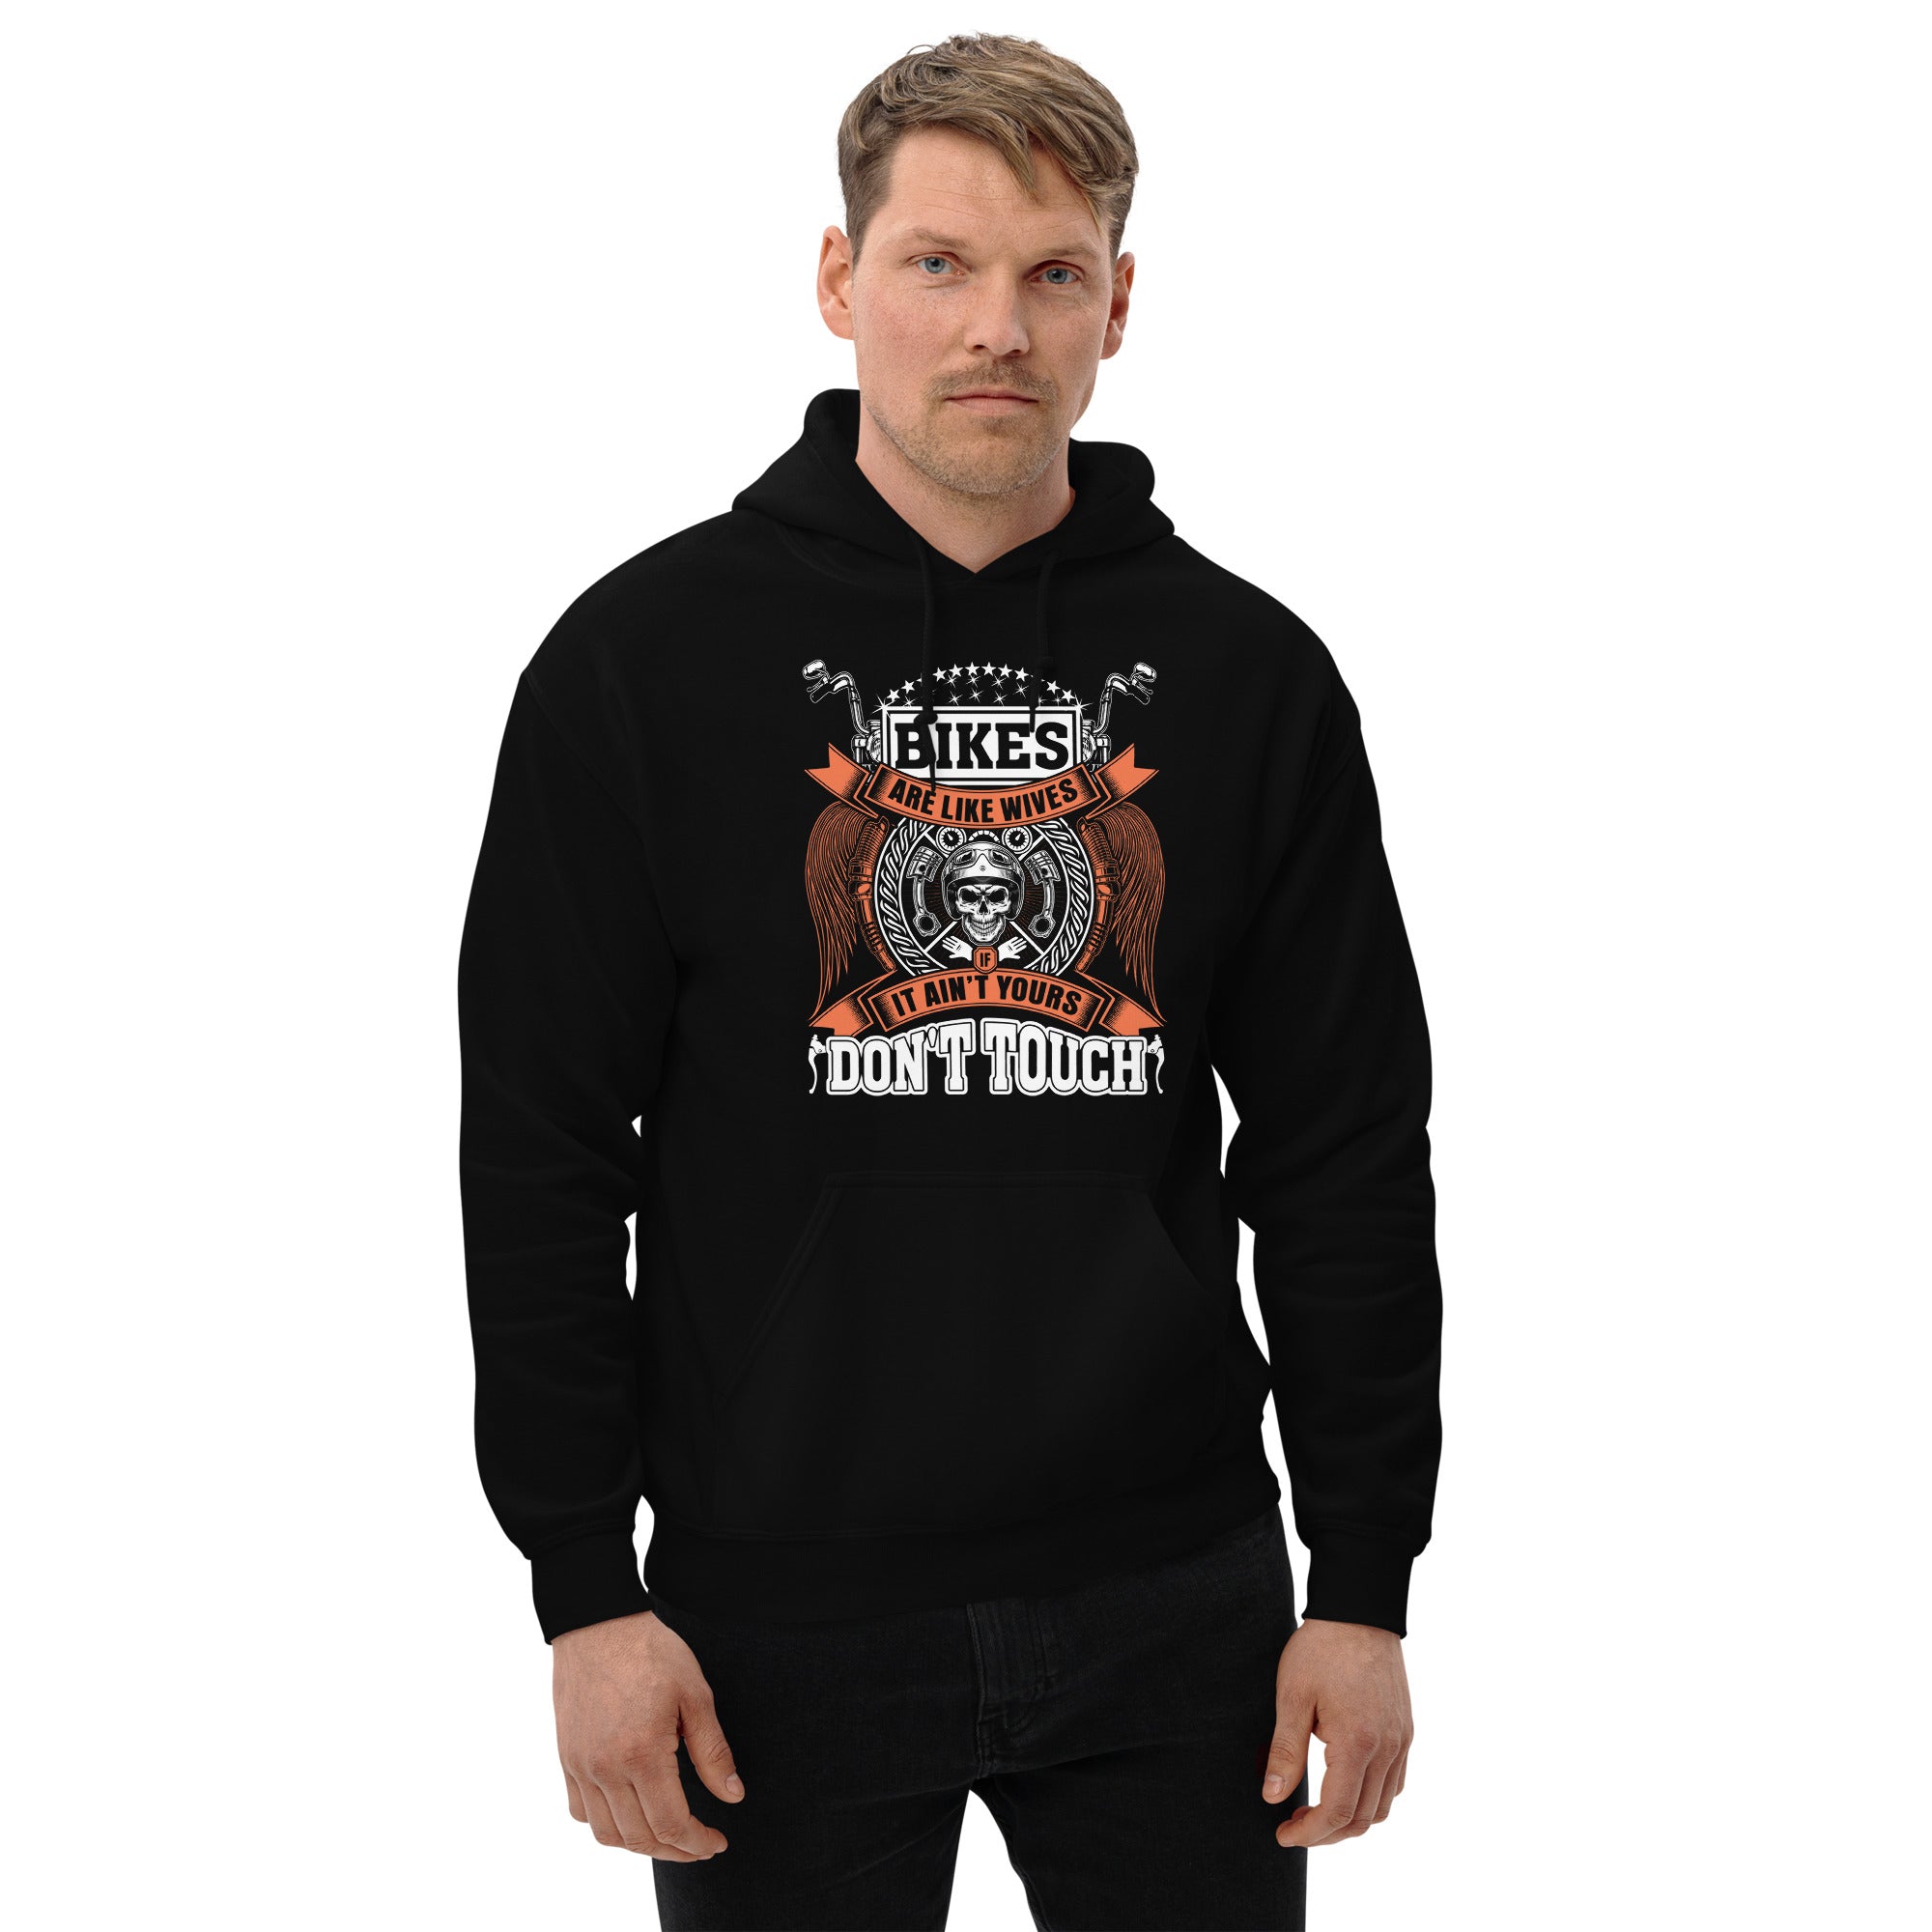 Bikes Are Like Wives, If It Ain't Yours, Don't Touch -  Unisex Hoodie